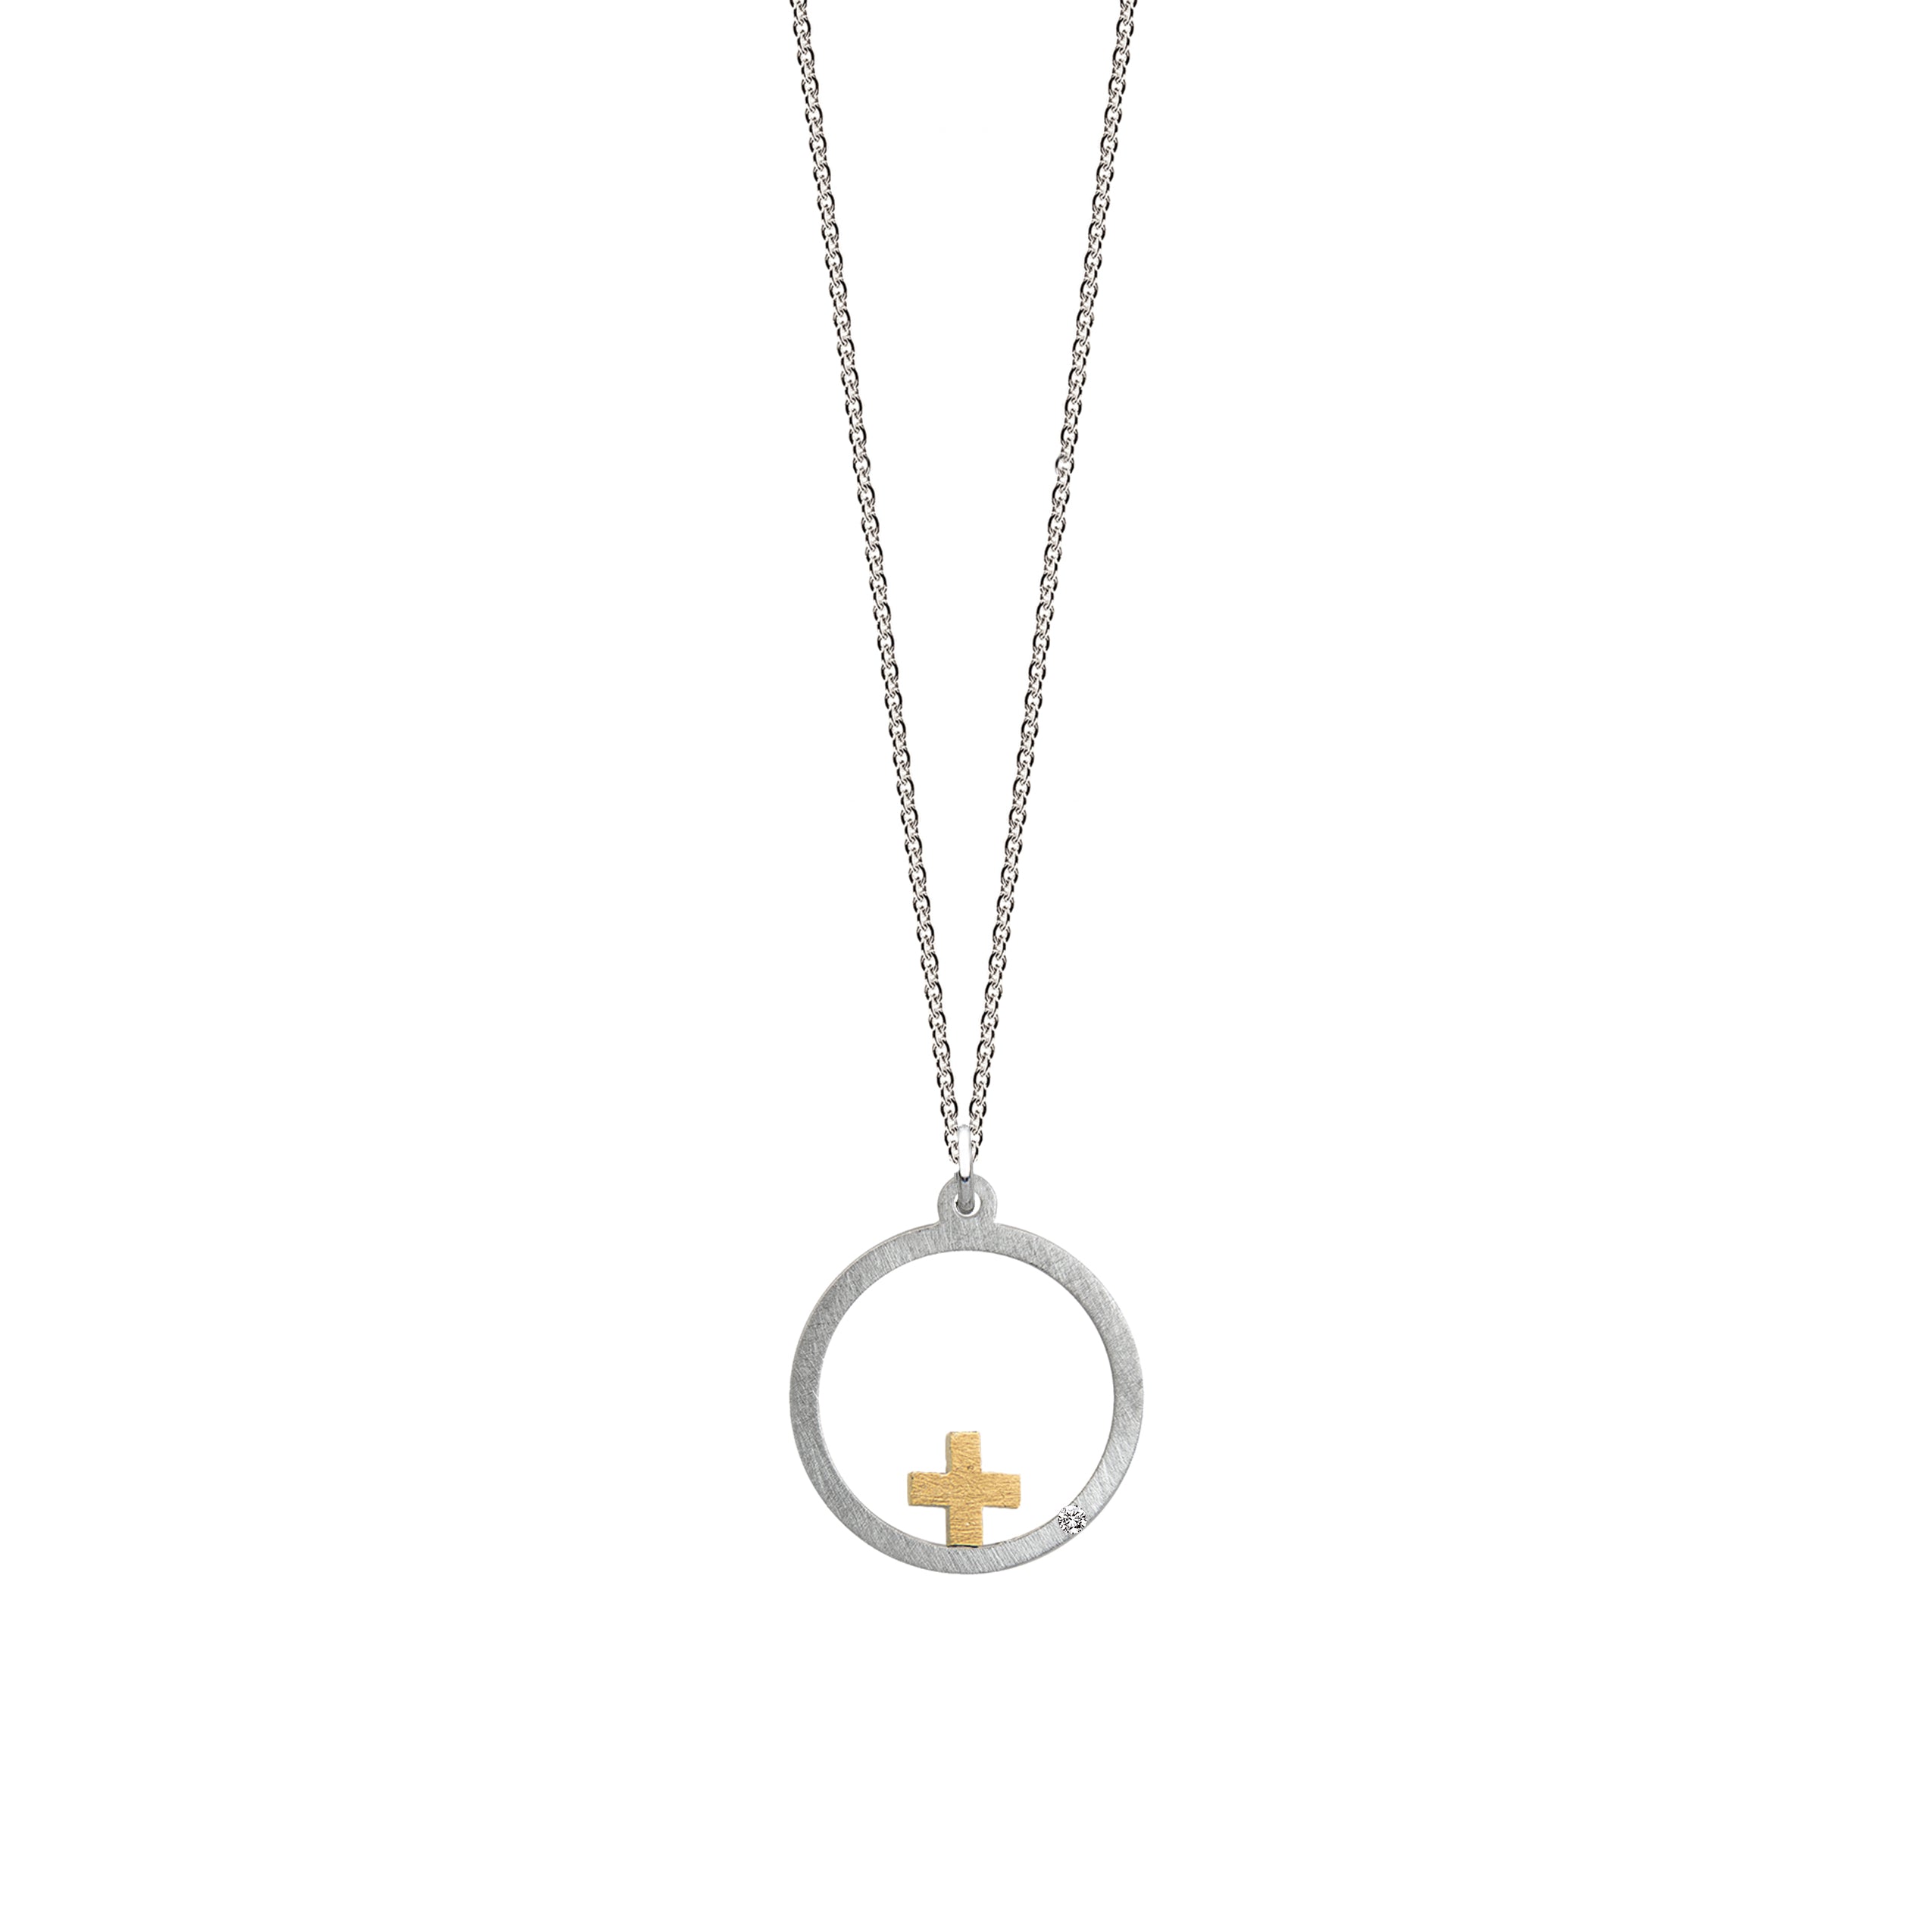 Intention pendant "POWER" with brilliant 0.007ct TWVS